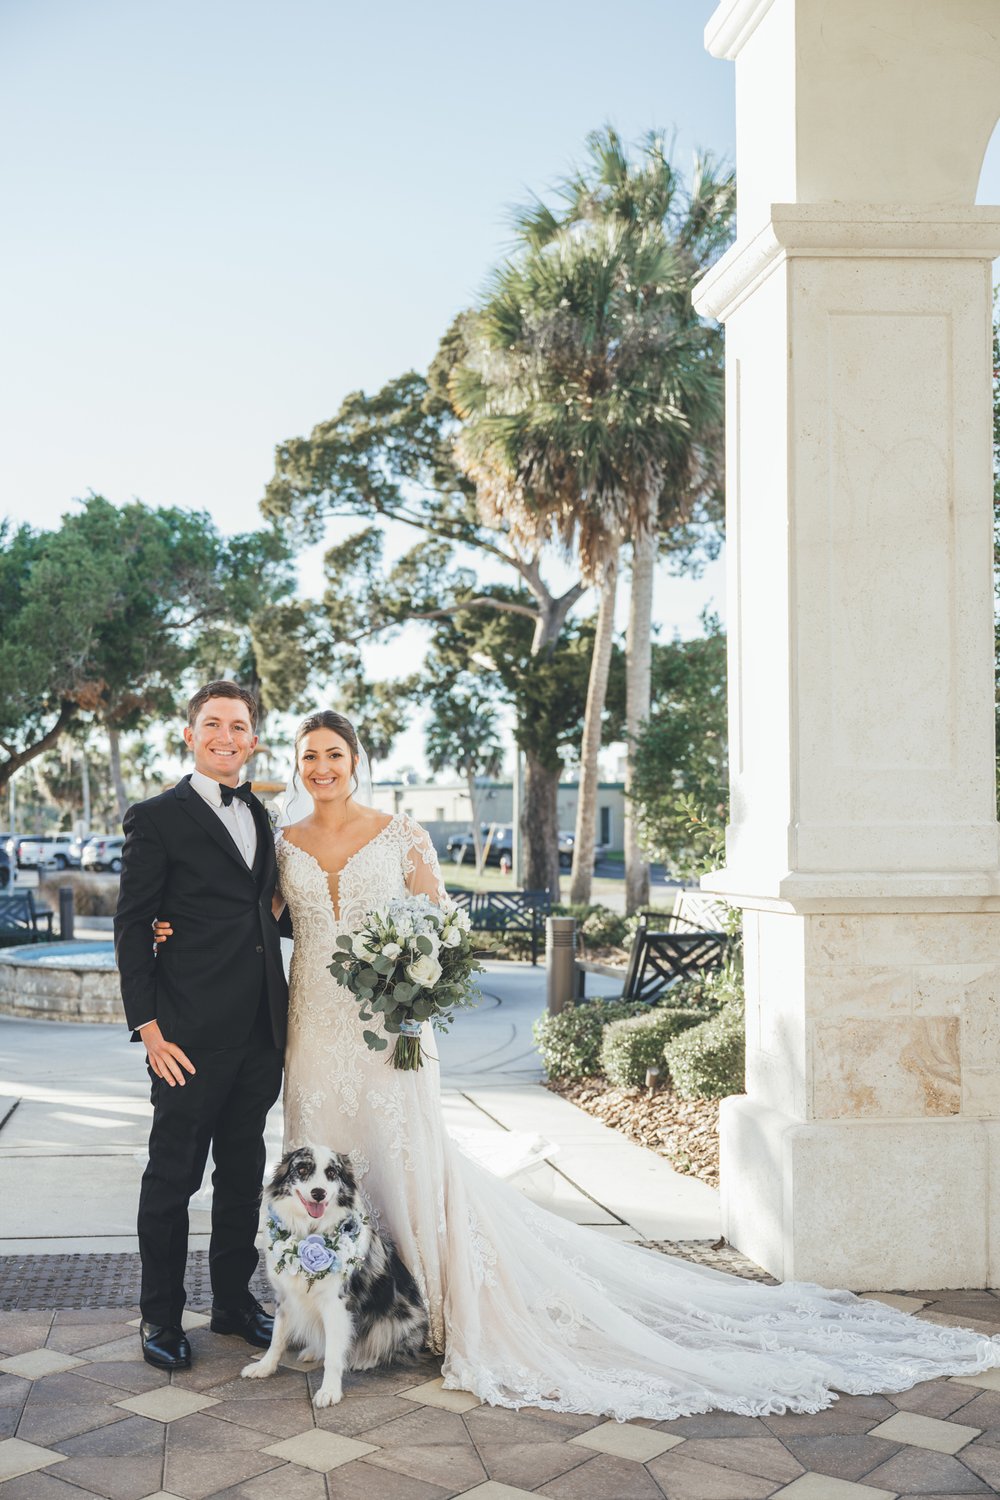 Southern Palms Studio couple poses with dog after wedding at River House in Jacksonville, FL.jpg